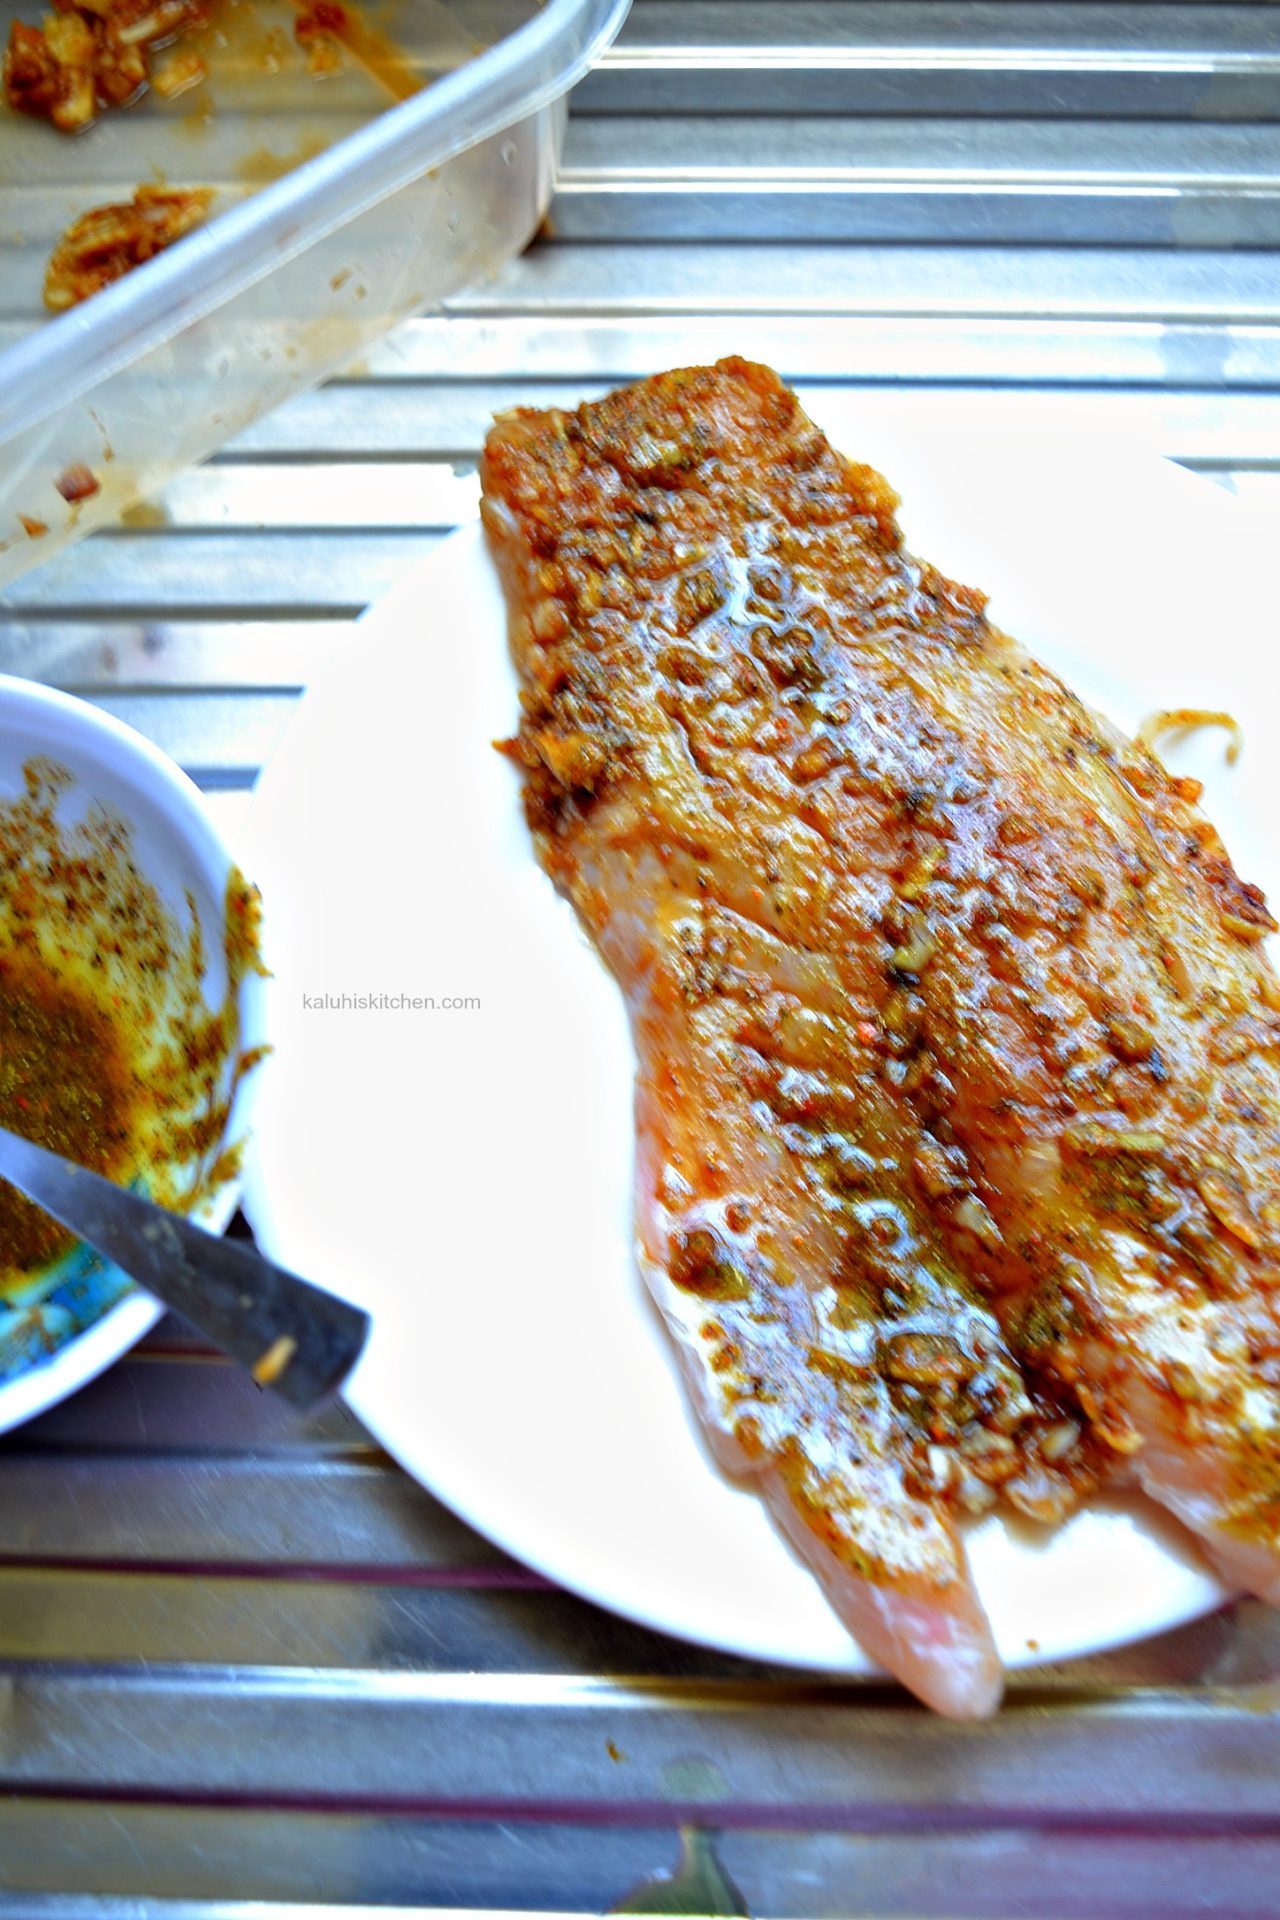 slather the fish masala spice blend all over your fish and proceed to fry it. The fish will cook in about 5-8 minutes depending on the thickness of your fish